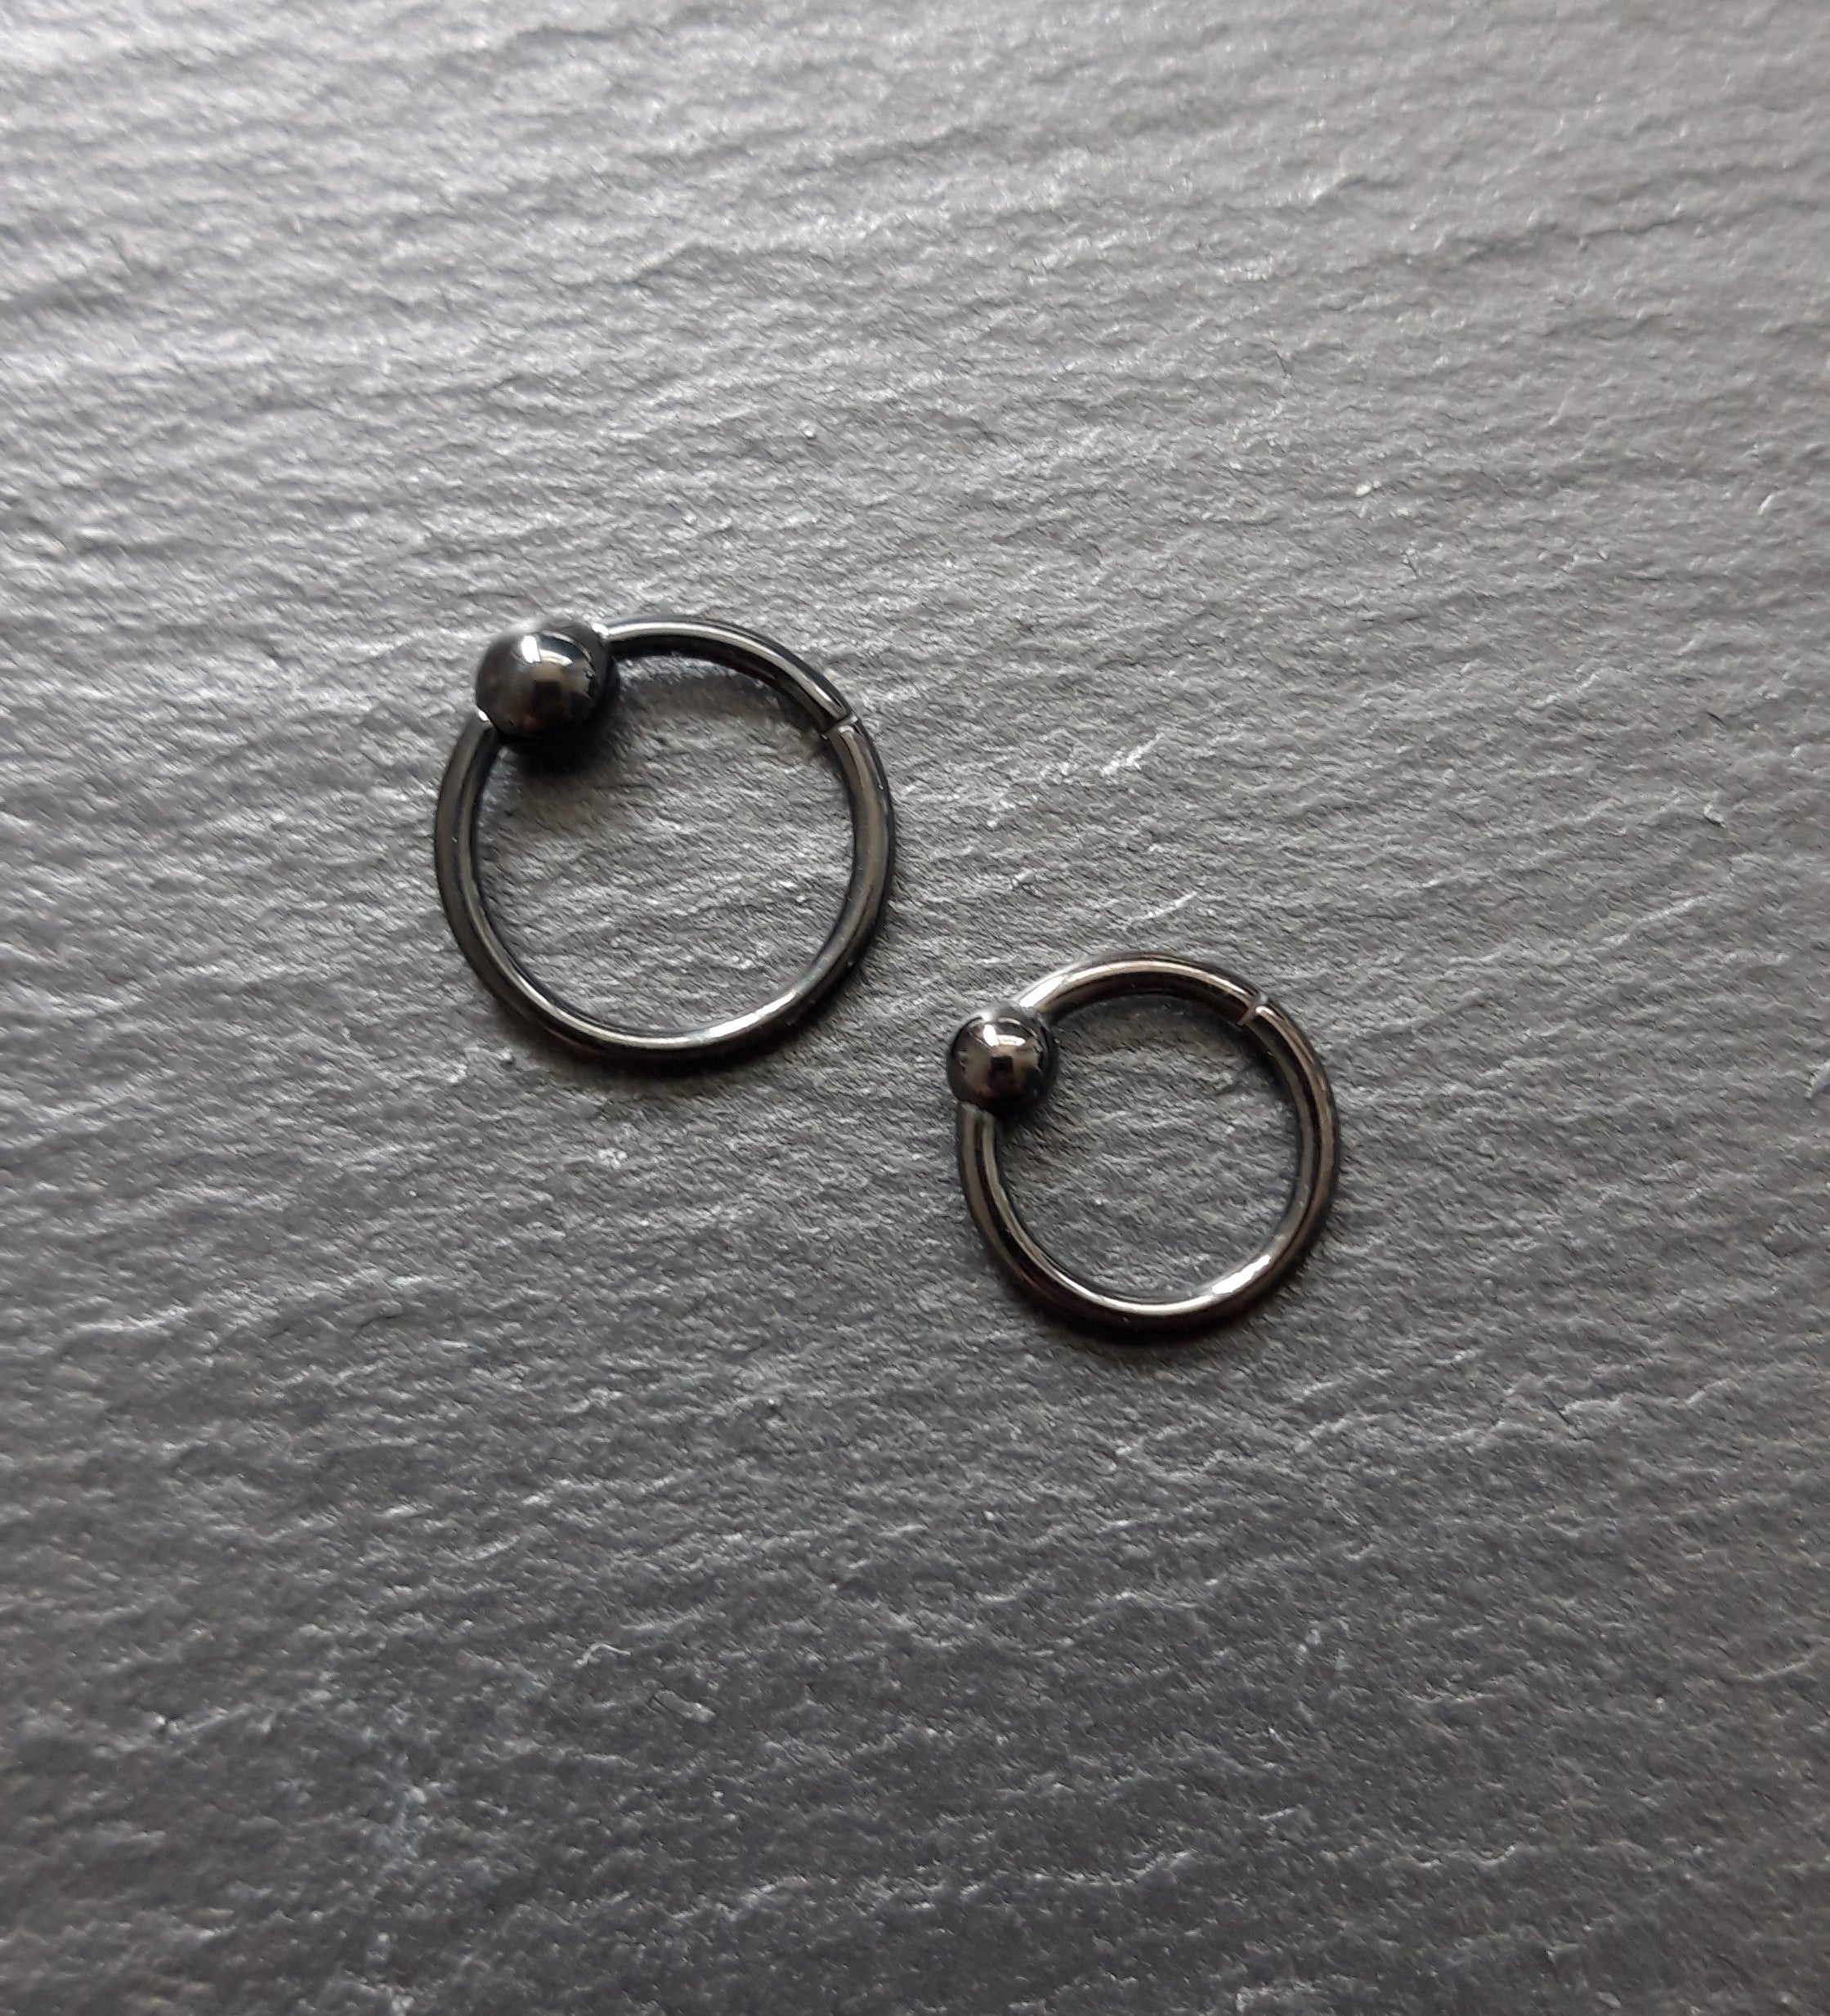 Black Steel Segment Ring Clicker with ball - thickness 1.6mm